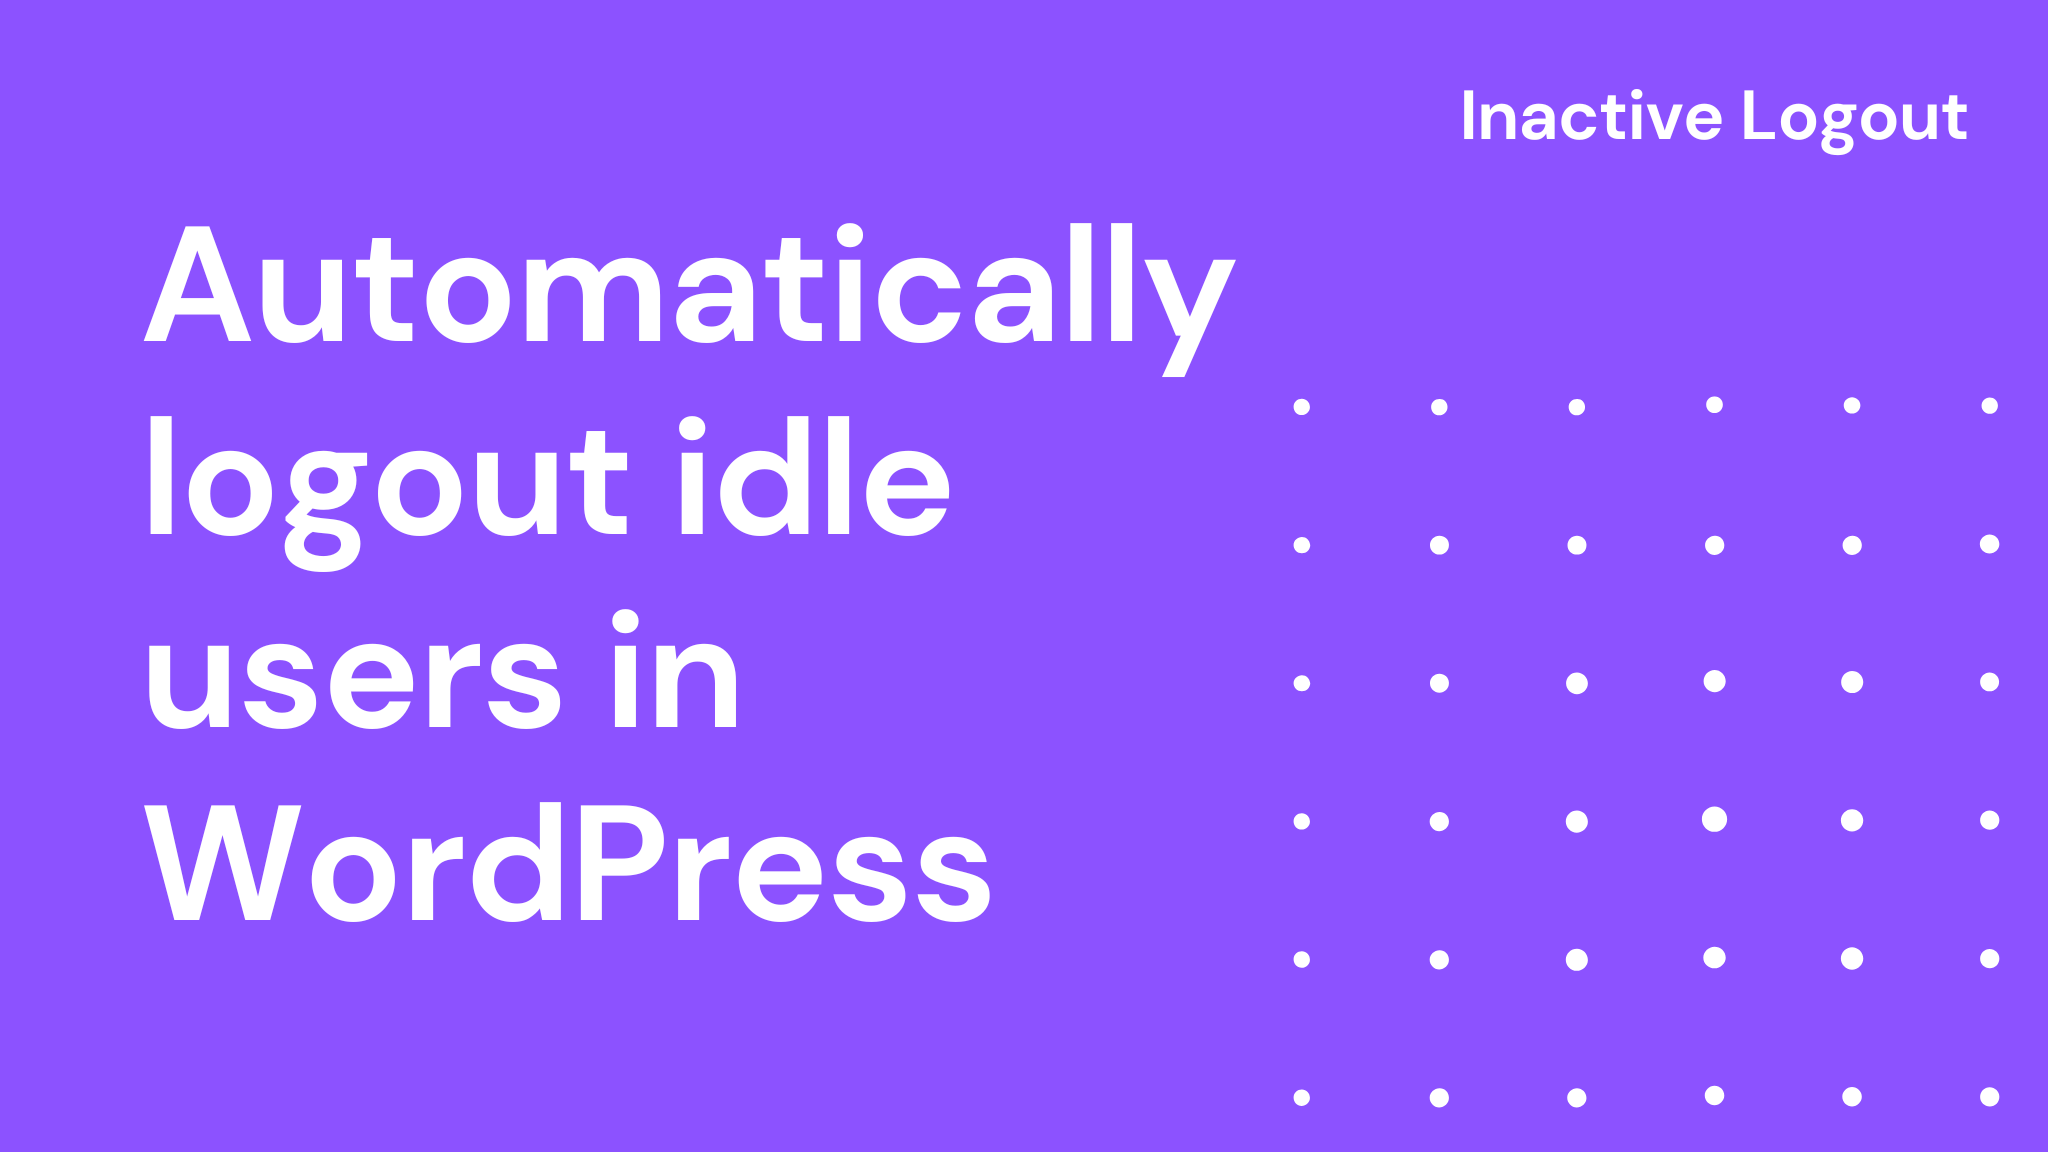 Automatically logout idle users in WordPress